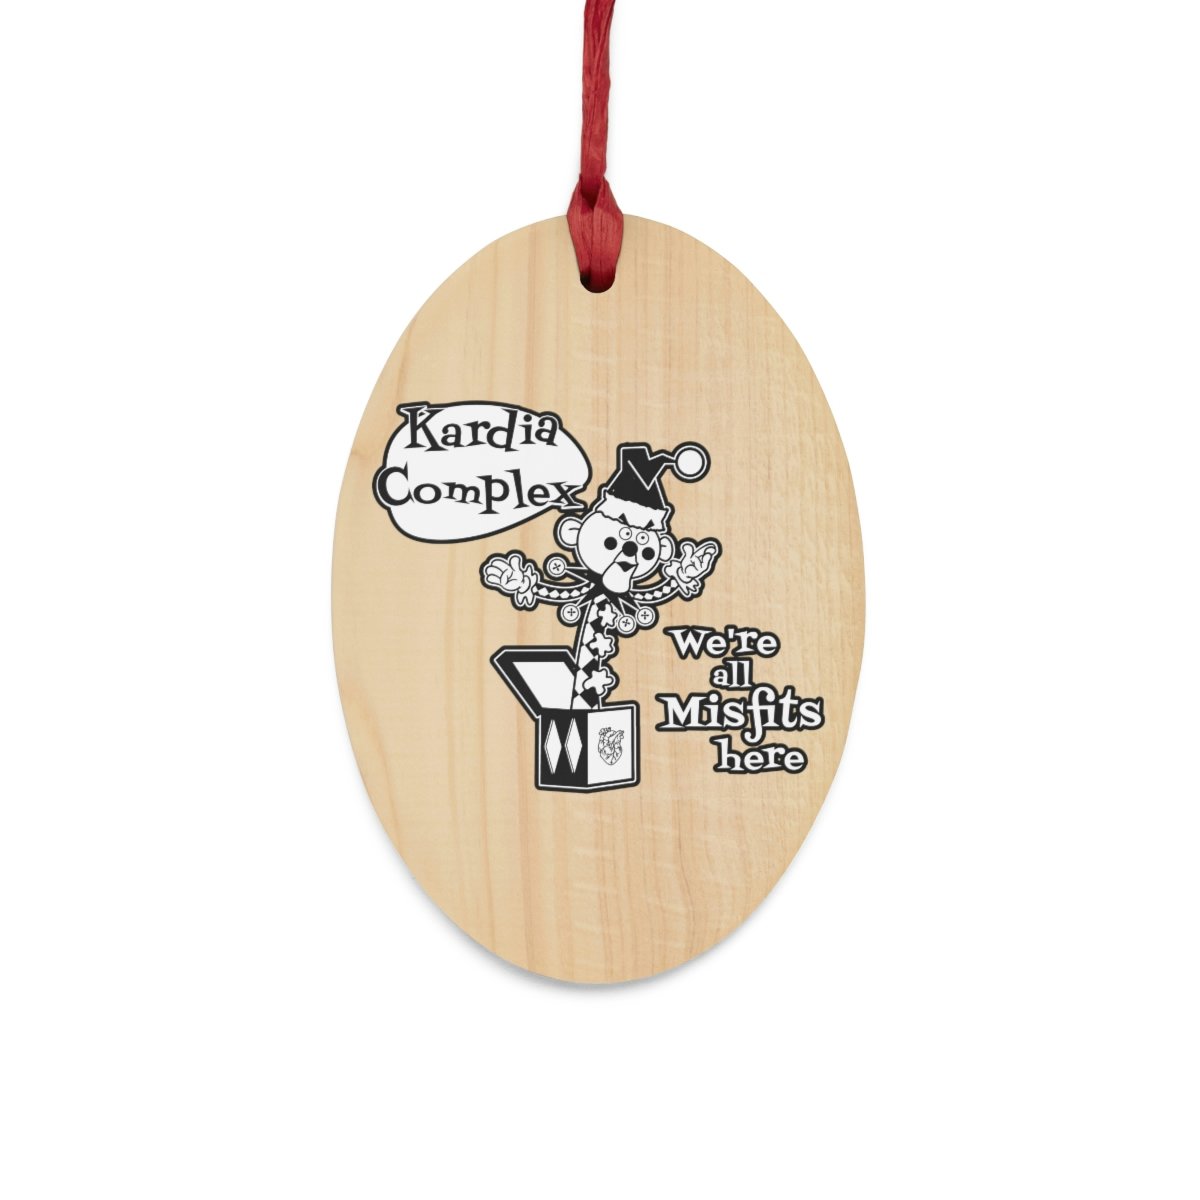 Kardia Complex – We’re All Misfits Here Wooden Christmas Ornaments